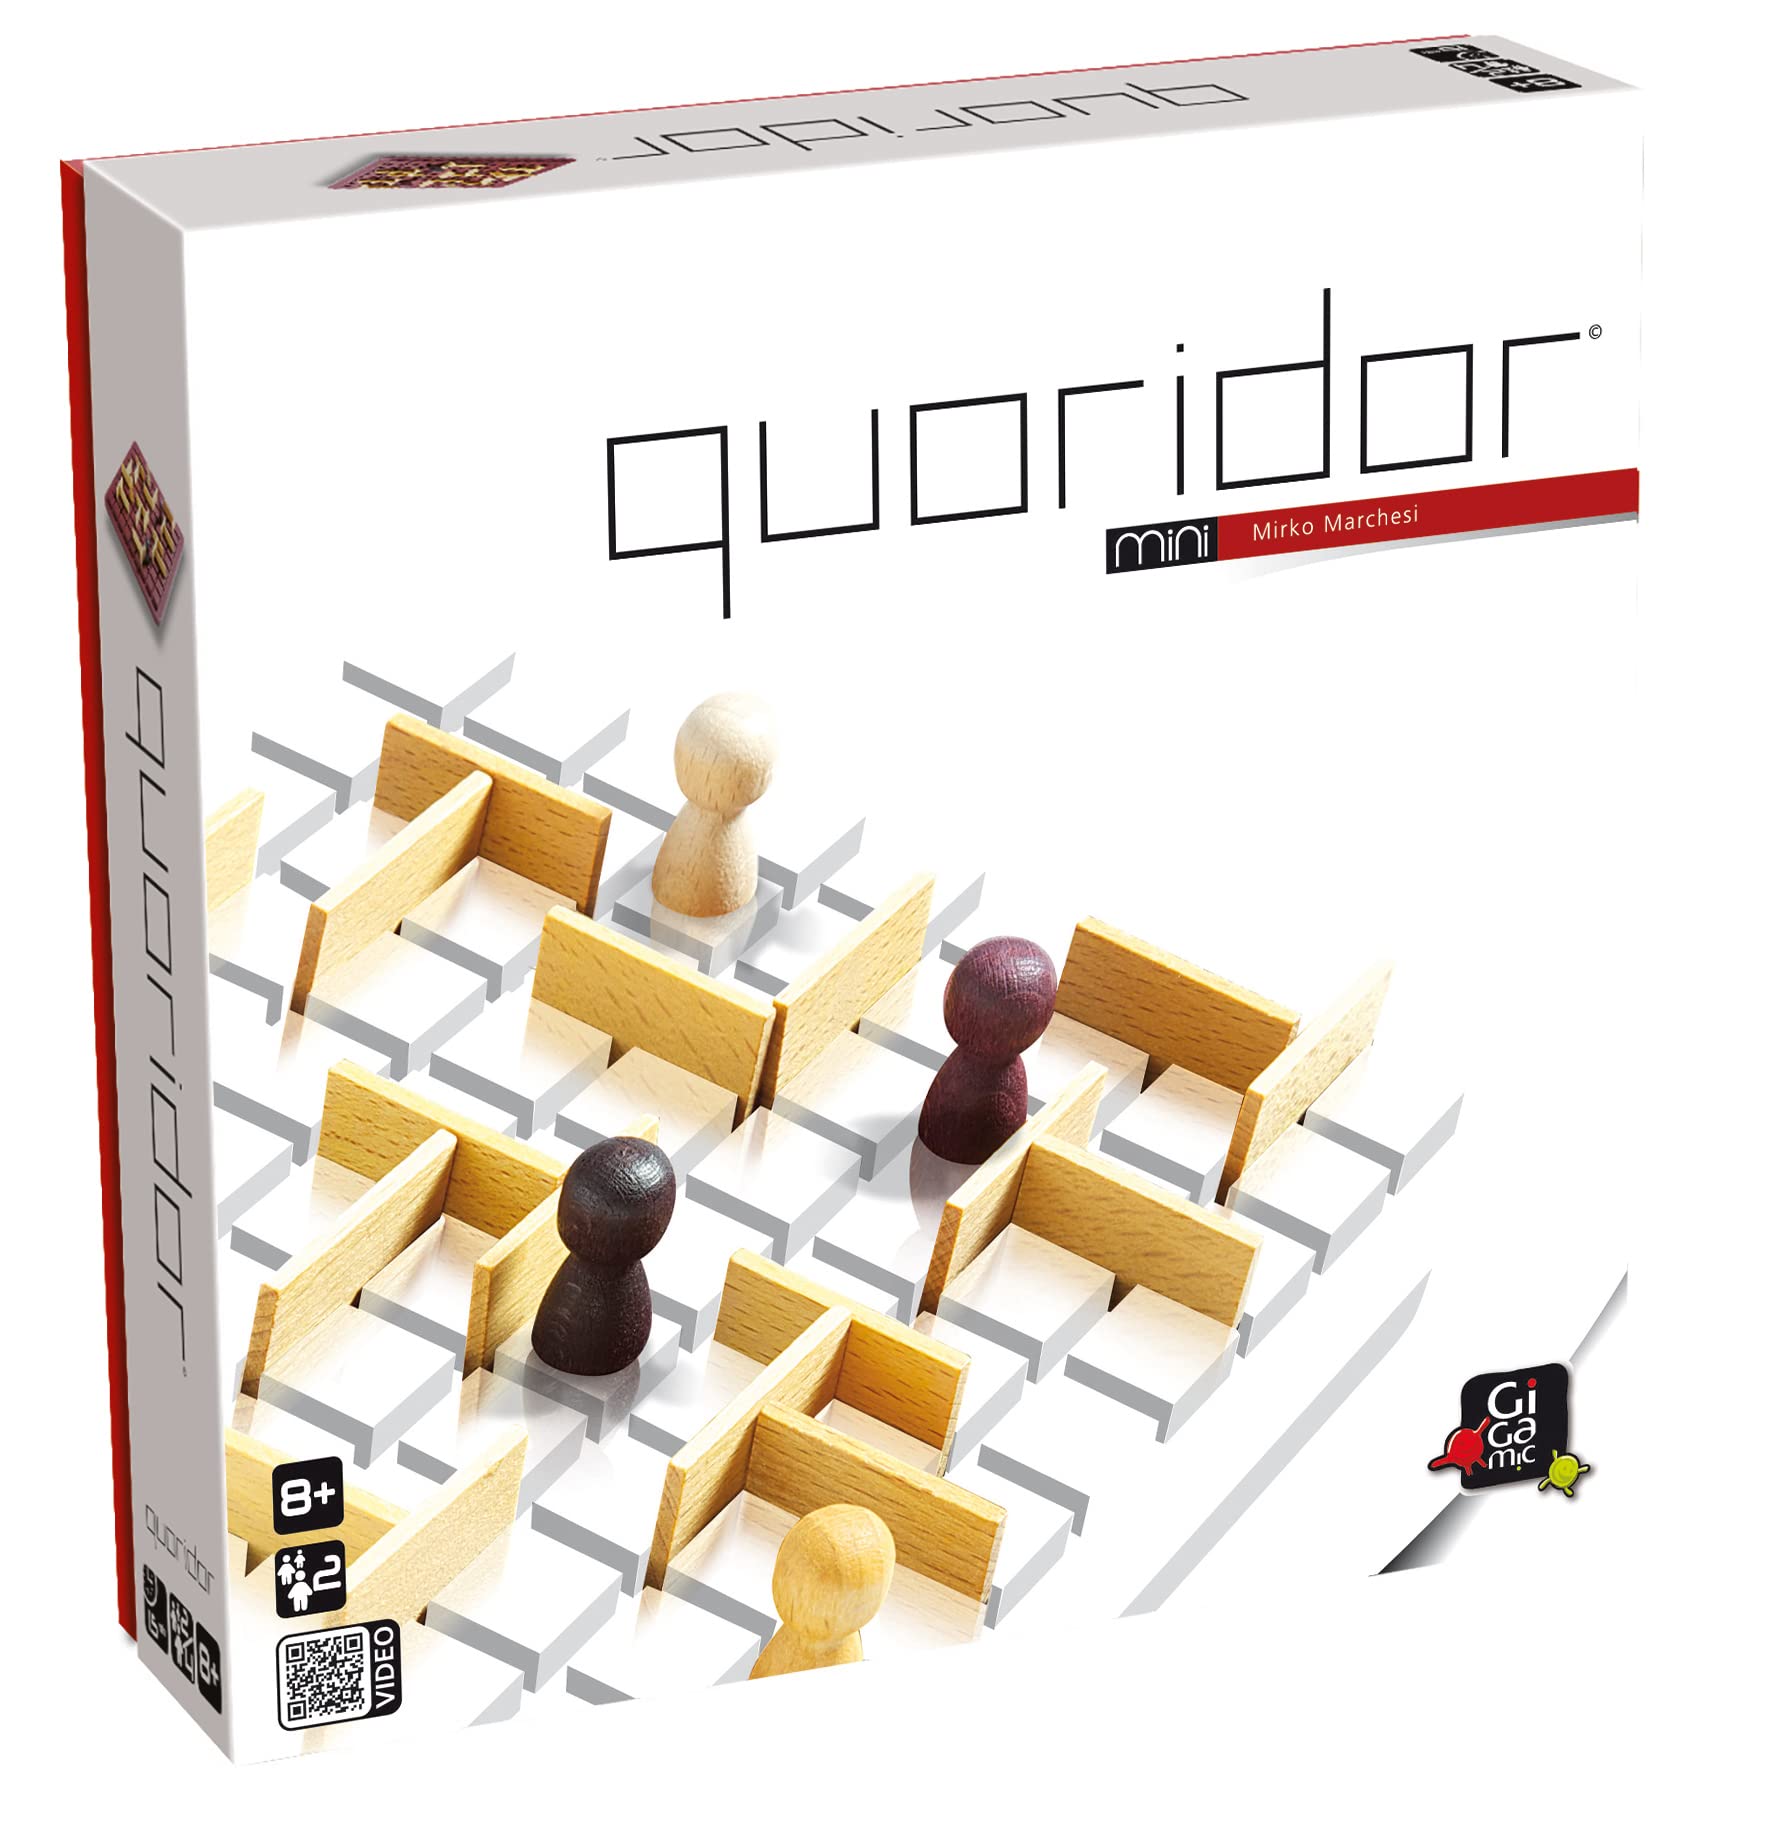 Quoridor Mini | Travel-Friendly Strategy Game for Families and Adults | Ages 8+ | 2 to 4 Players | 15 Minutes